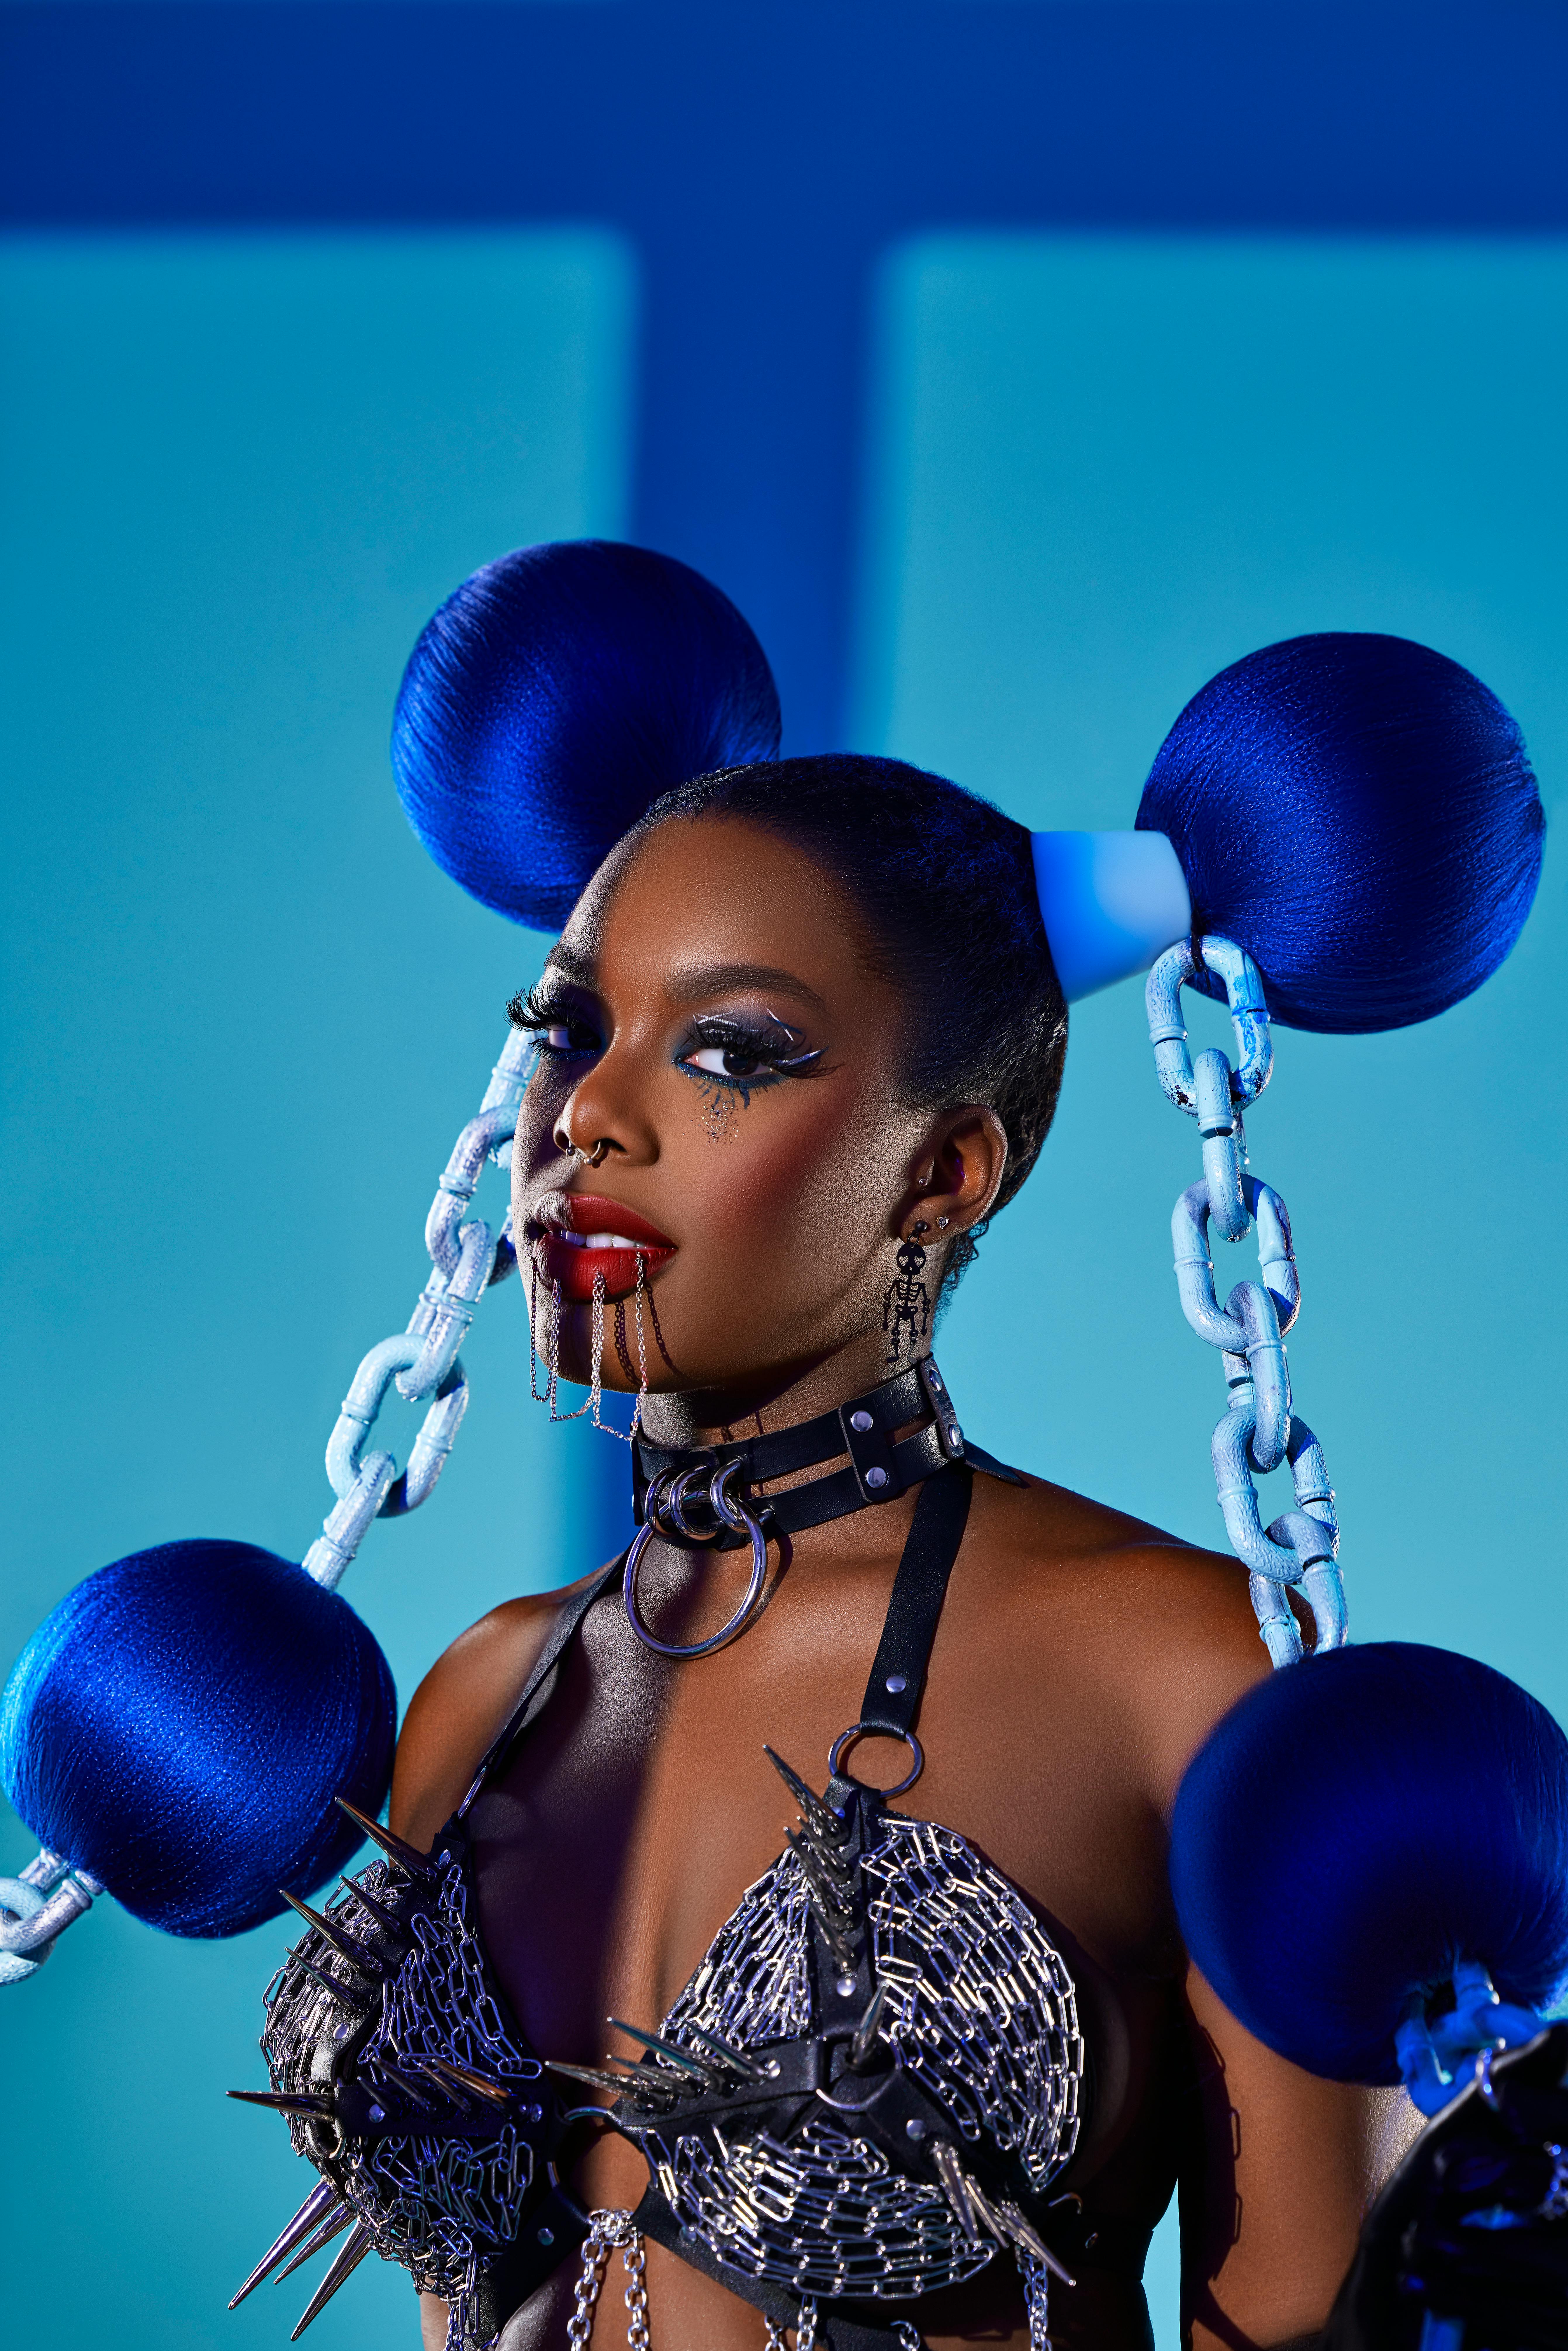 Black Model with Weird Blue Hair Wearing Chain Bra · Free Stock Photo